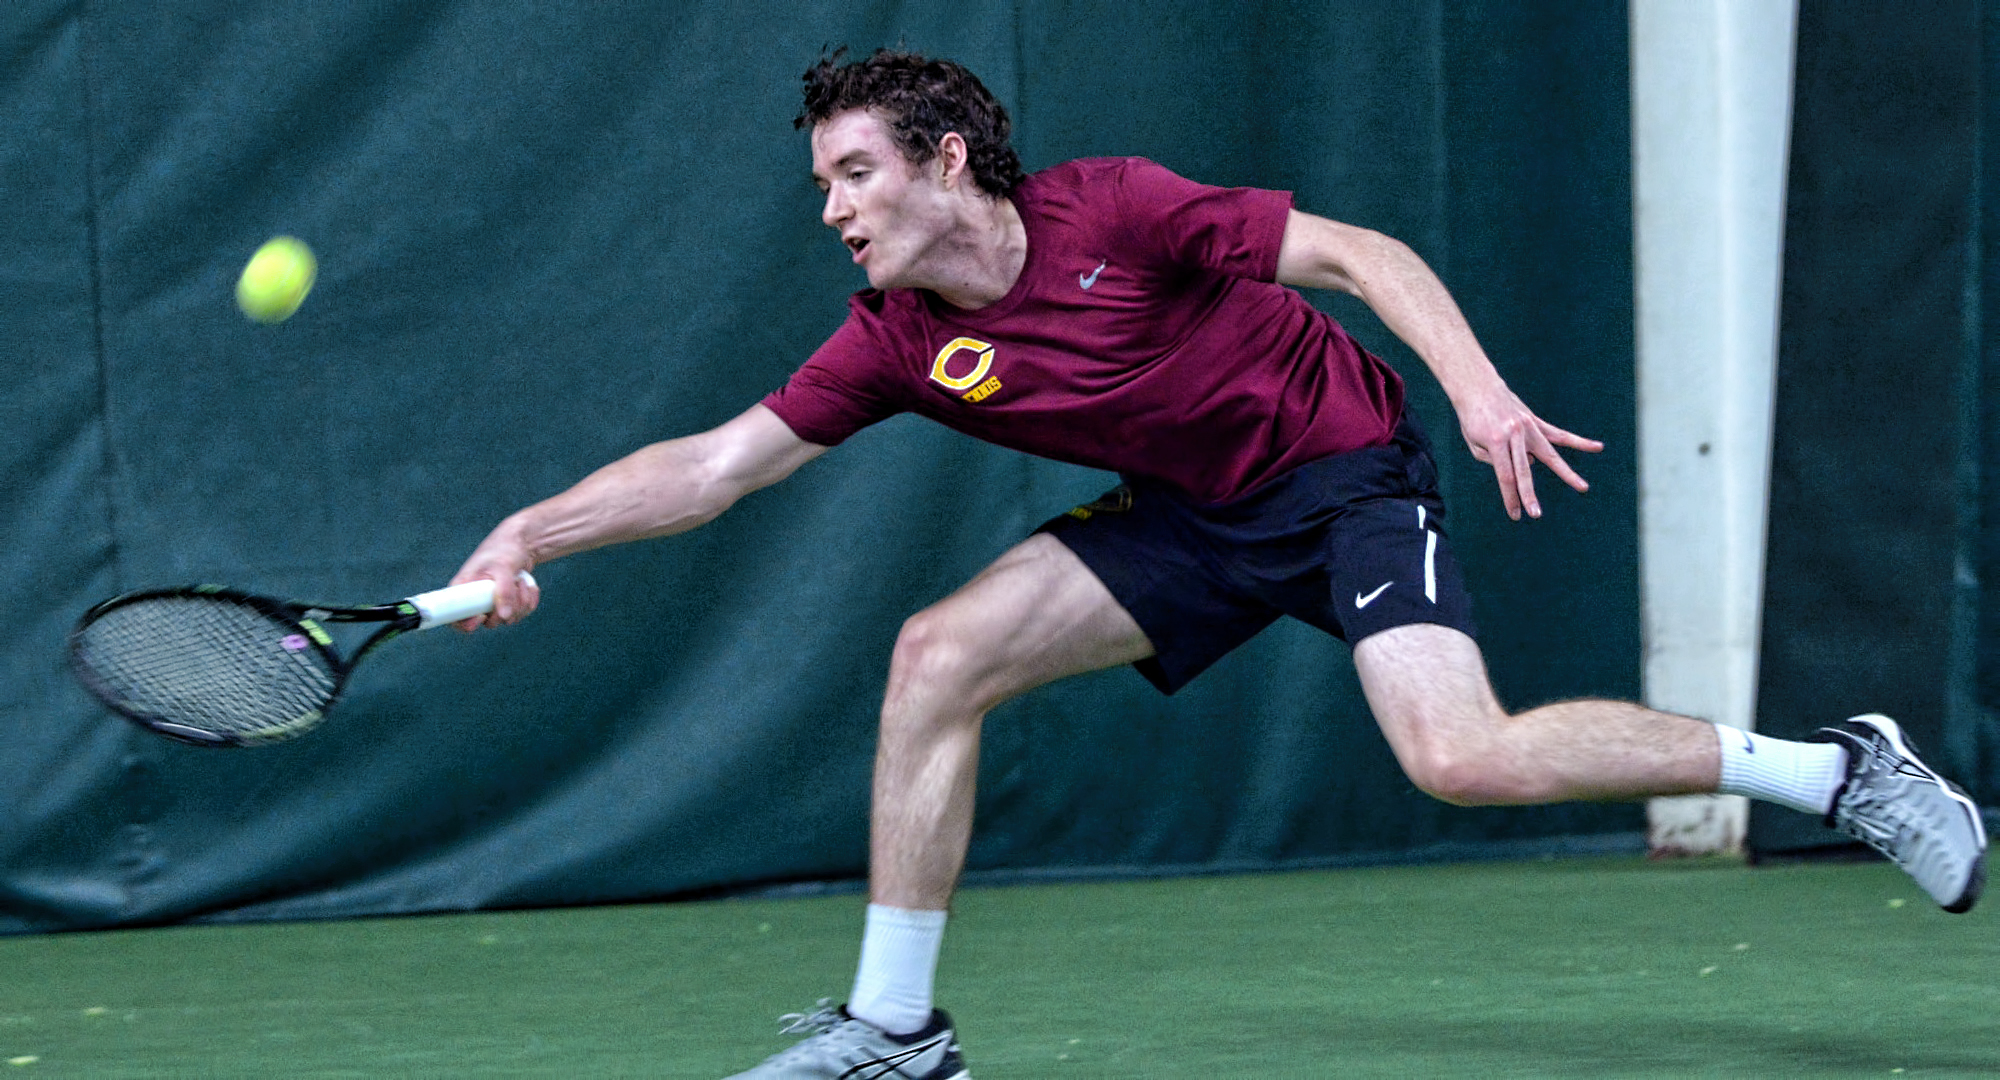 Sophomore Erik Porter stretches for a forehand. He cruised to a 6-1, 6-1 win at No.2 singles in the Cobbers' 5-4 win over St. Olaf.